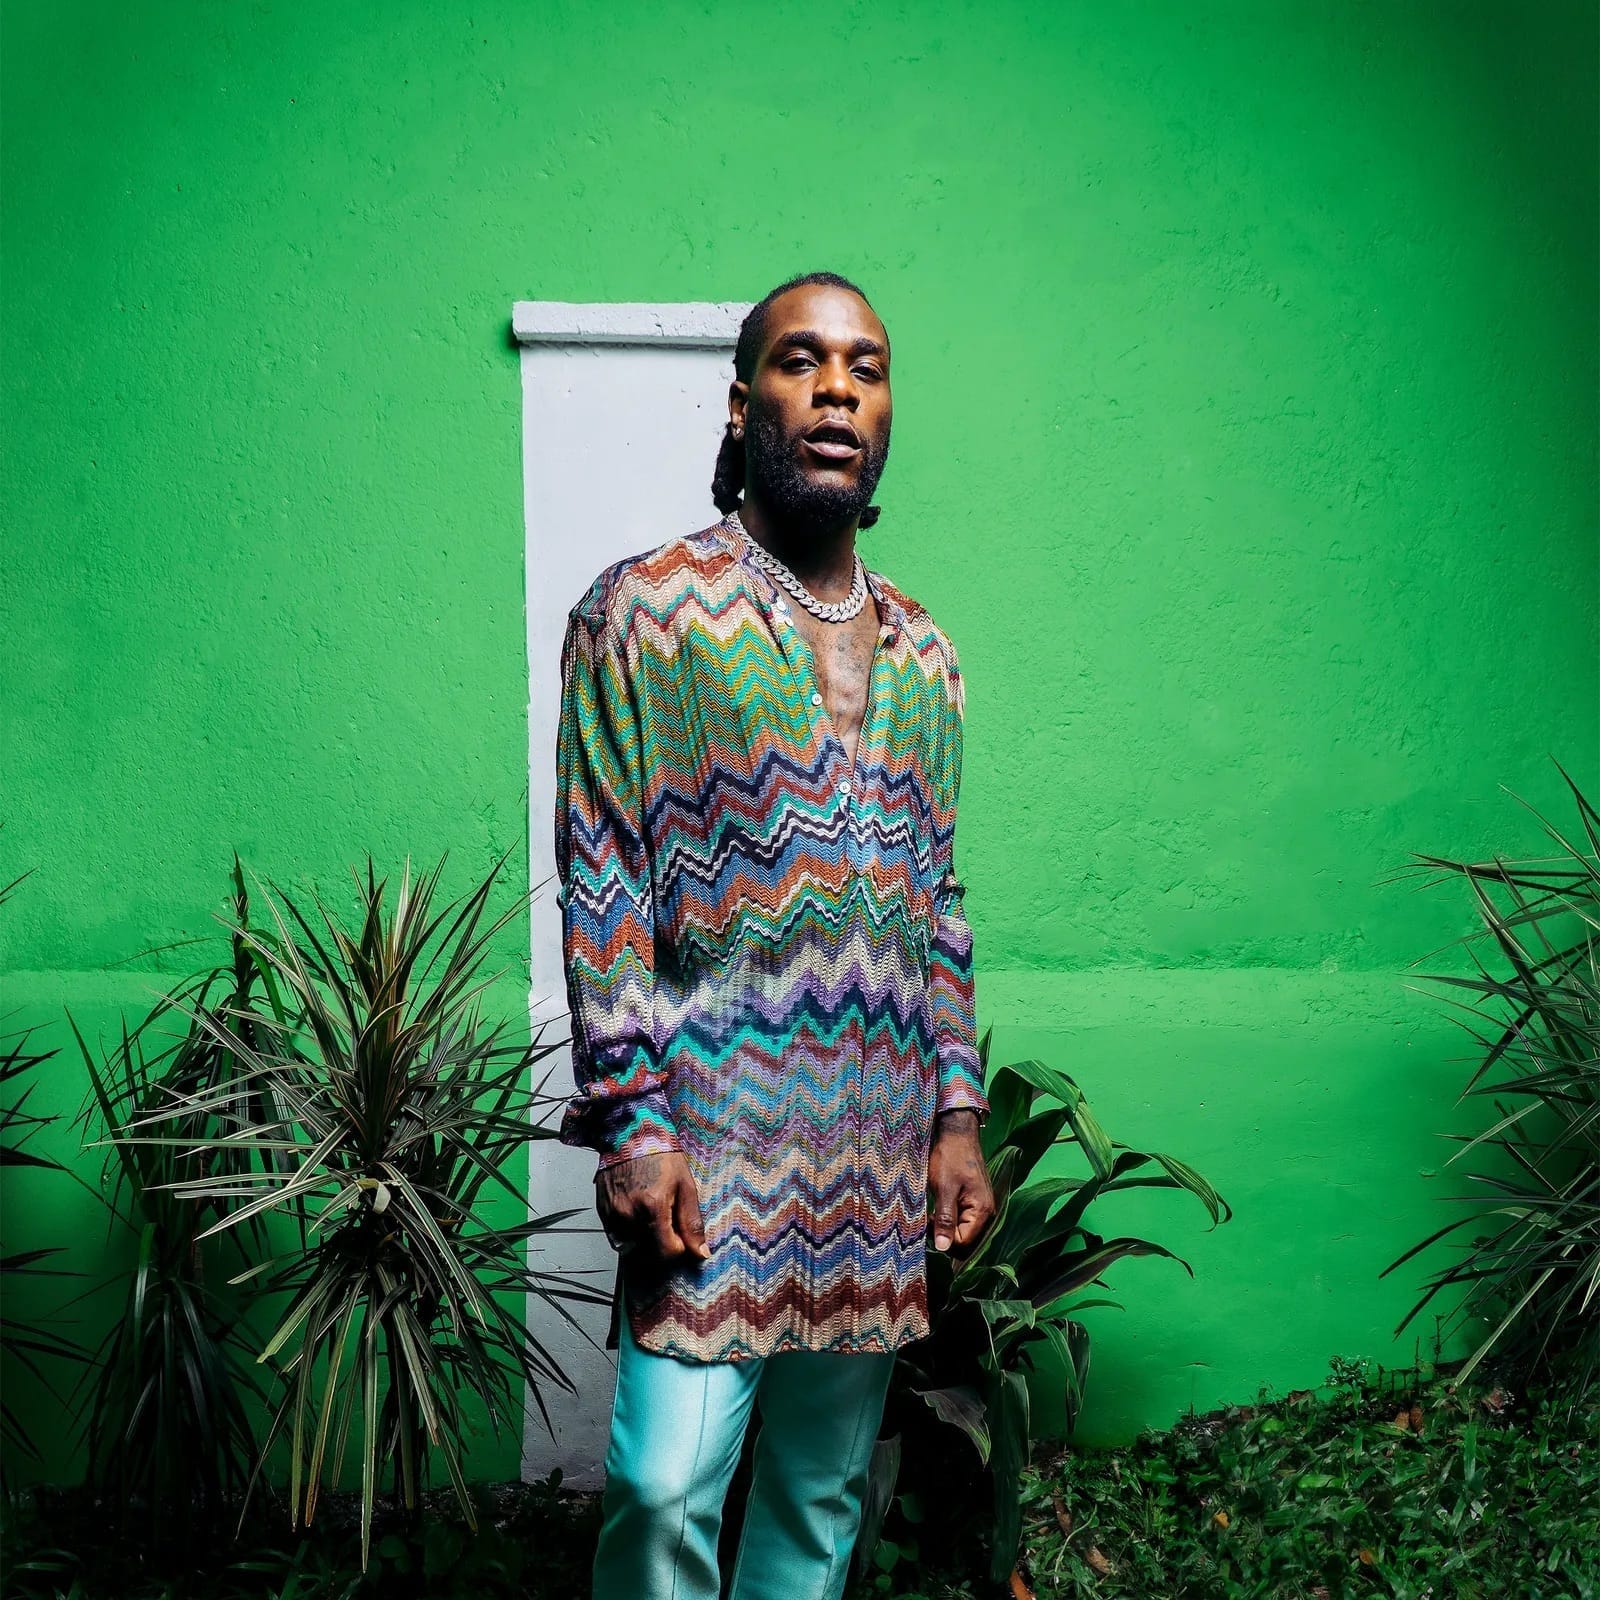 Burna Boy at Grammys, African Art and Fashion, Top Solo Travel Destinations for Women